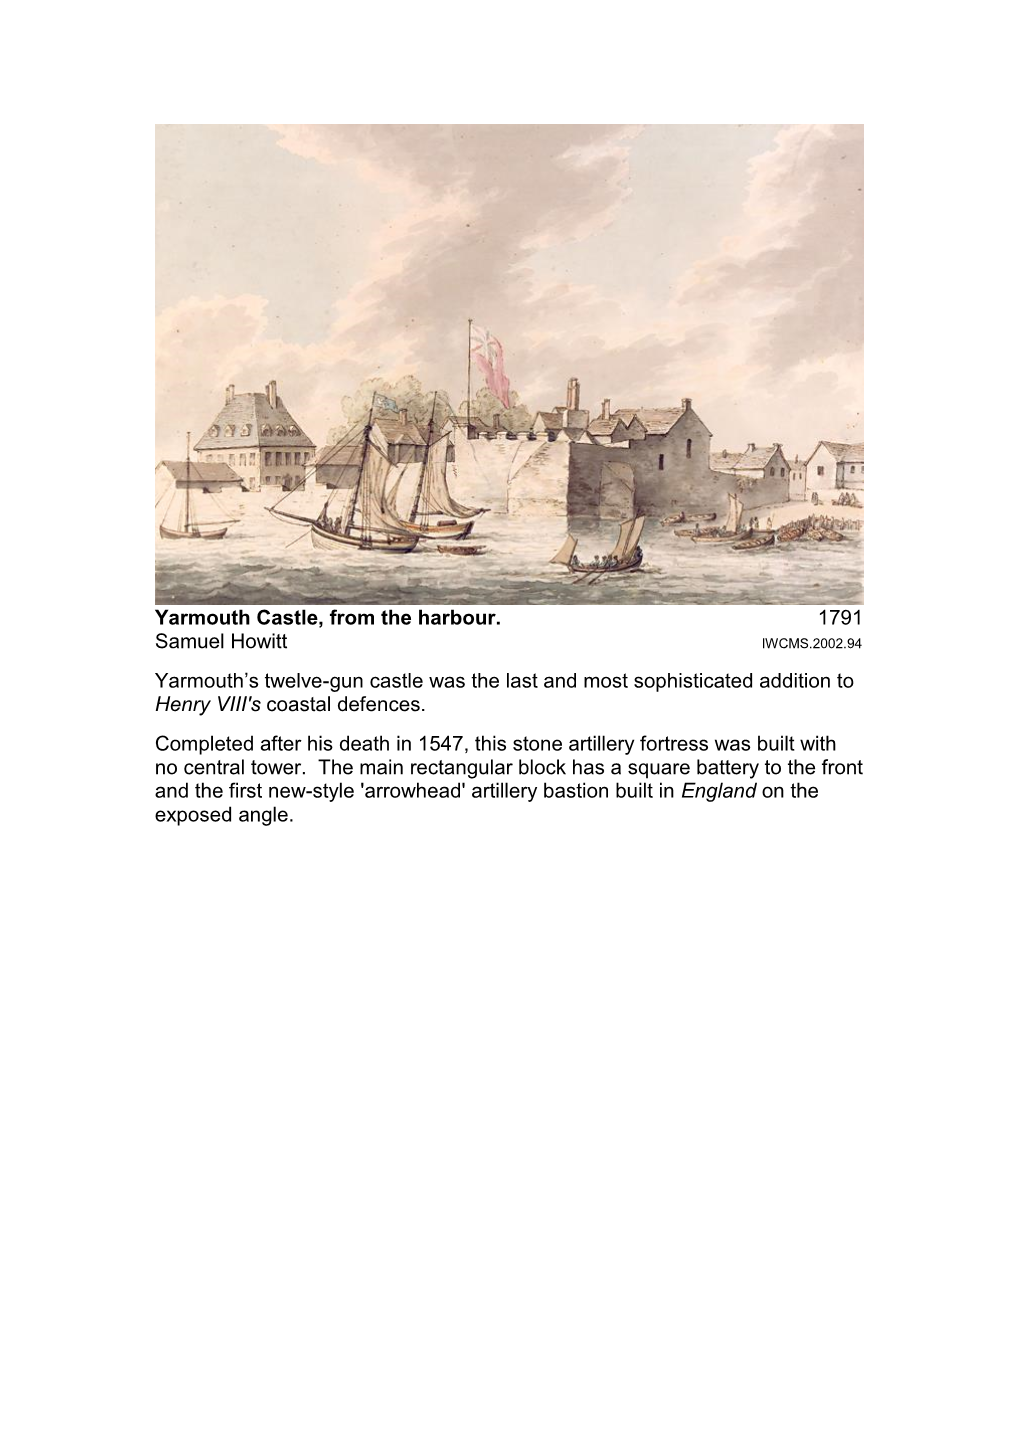 Yarmouth Castle, from the Harbour. 1791 Samuel Howitt Yarmouth's